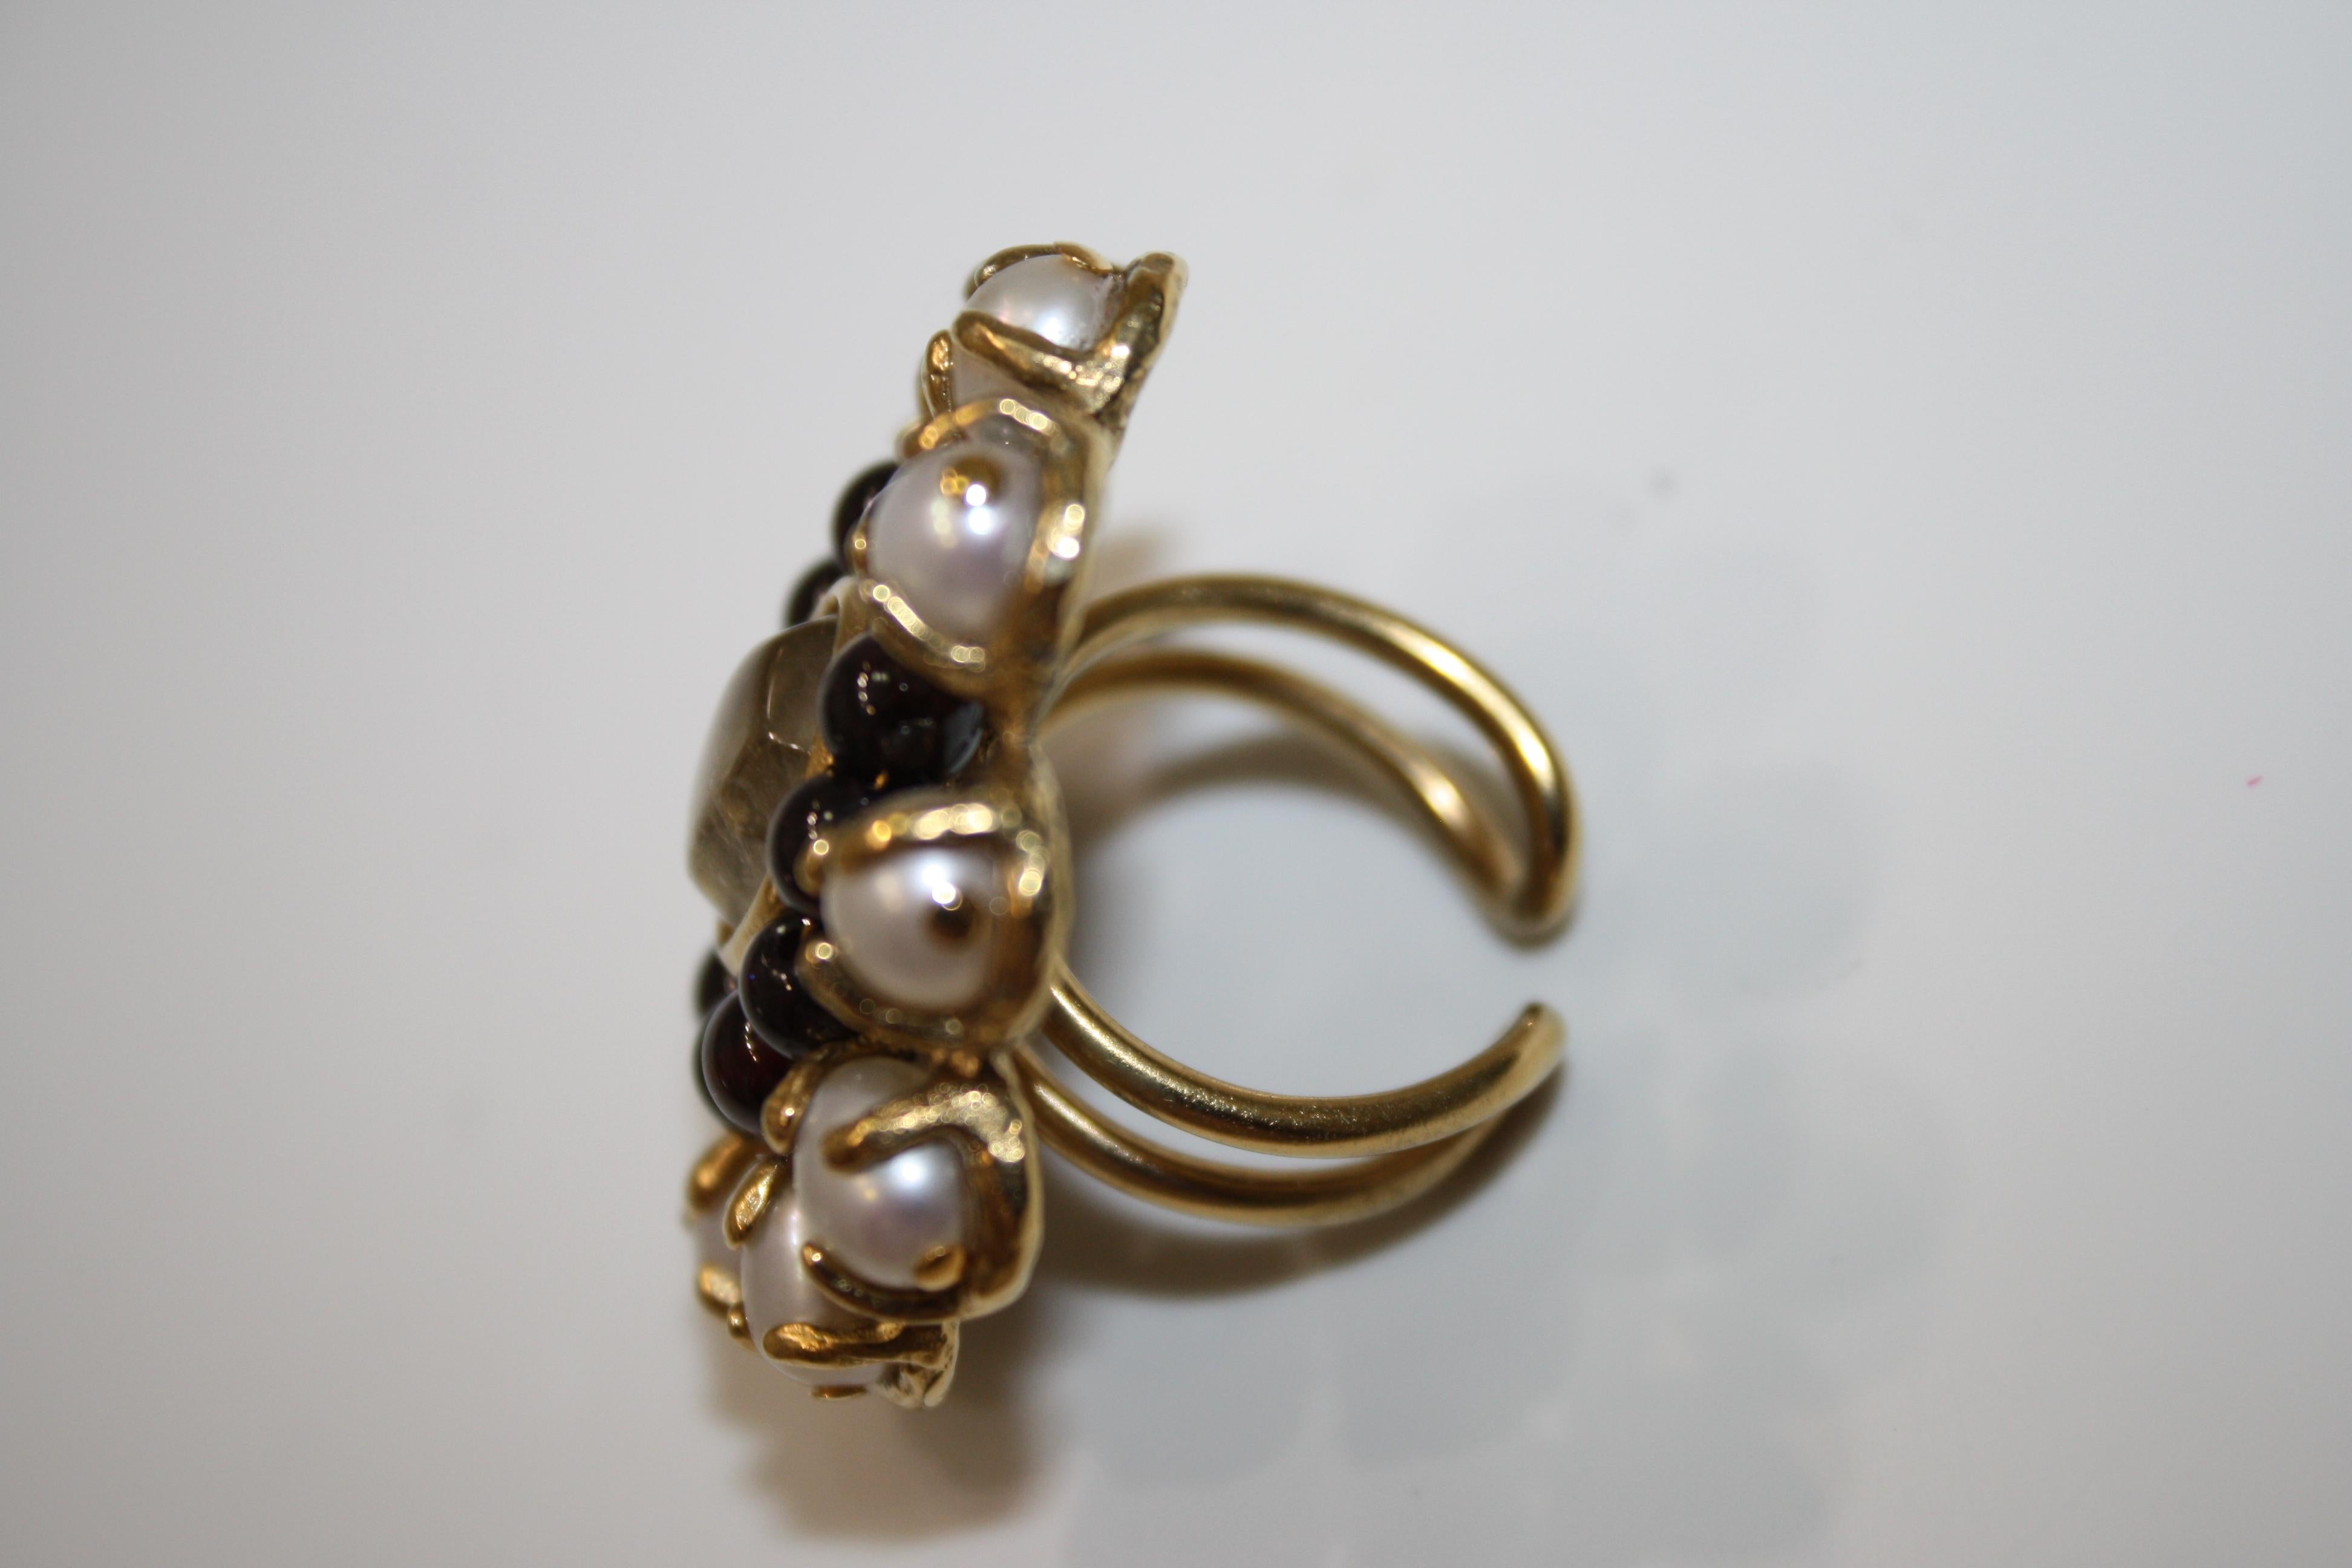 Adjustable ring in classic Goossens style.
24kt gold plated brass Perle Baroque floral ring from featuring pearl embellishments , garnet stones and faceted rock crystal cabochon
Each piece of jewellery made by the House of Goossens is anchored in a